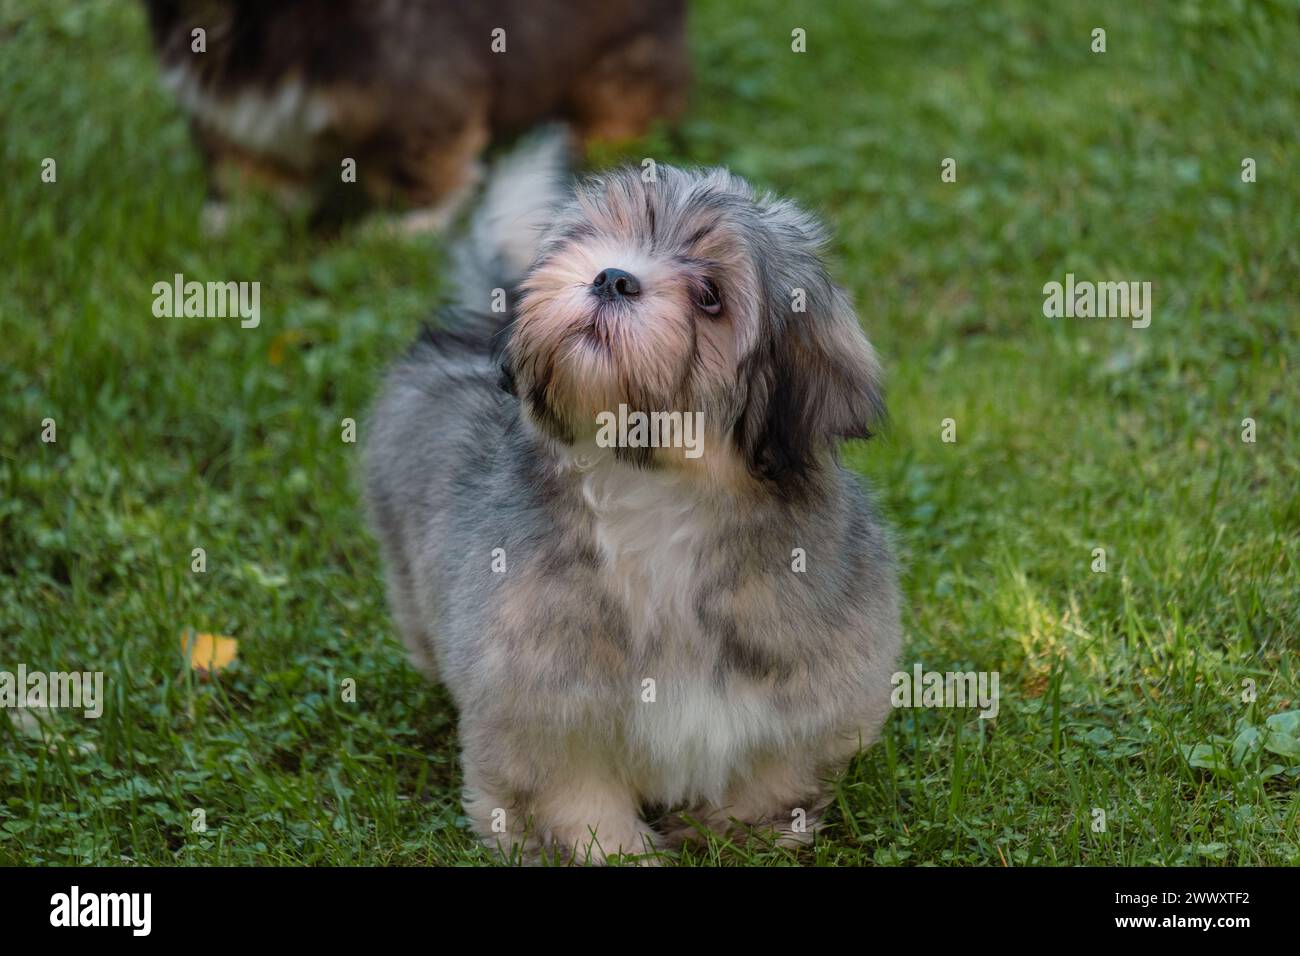 A fluffy grey puppy with soulful eyes looks up, ideal for themes of animal care, nurturing pet products, and promoting compassionate adoption and welf Stock Photo